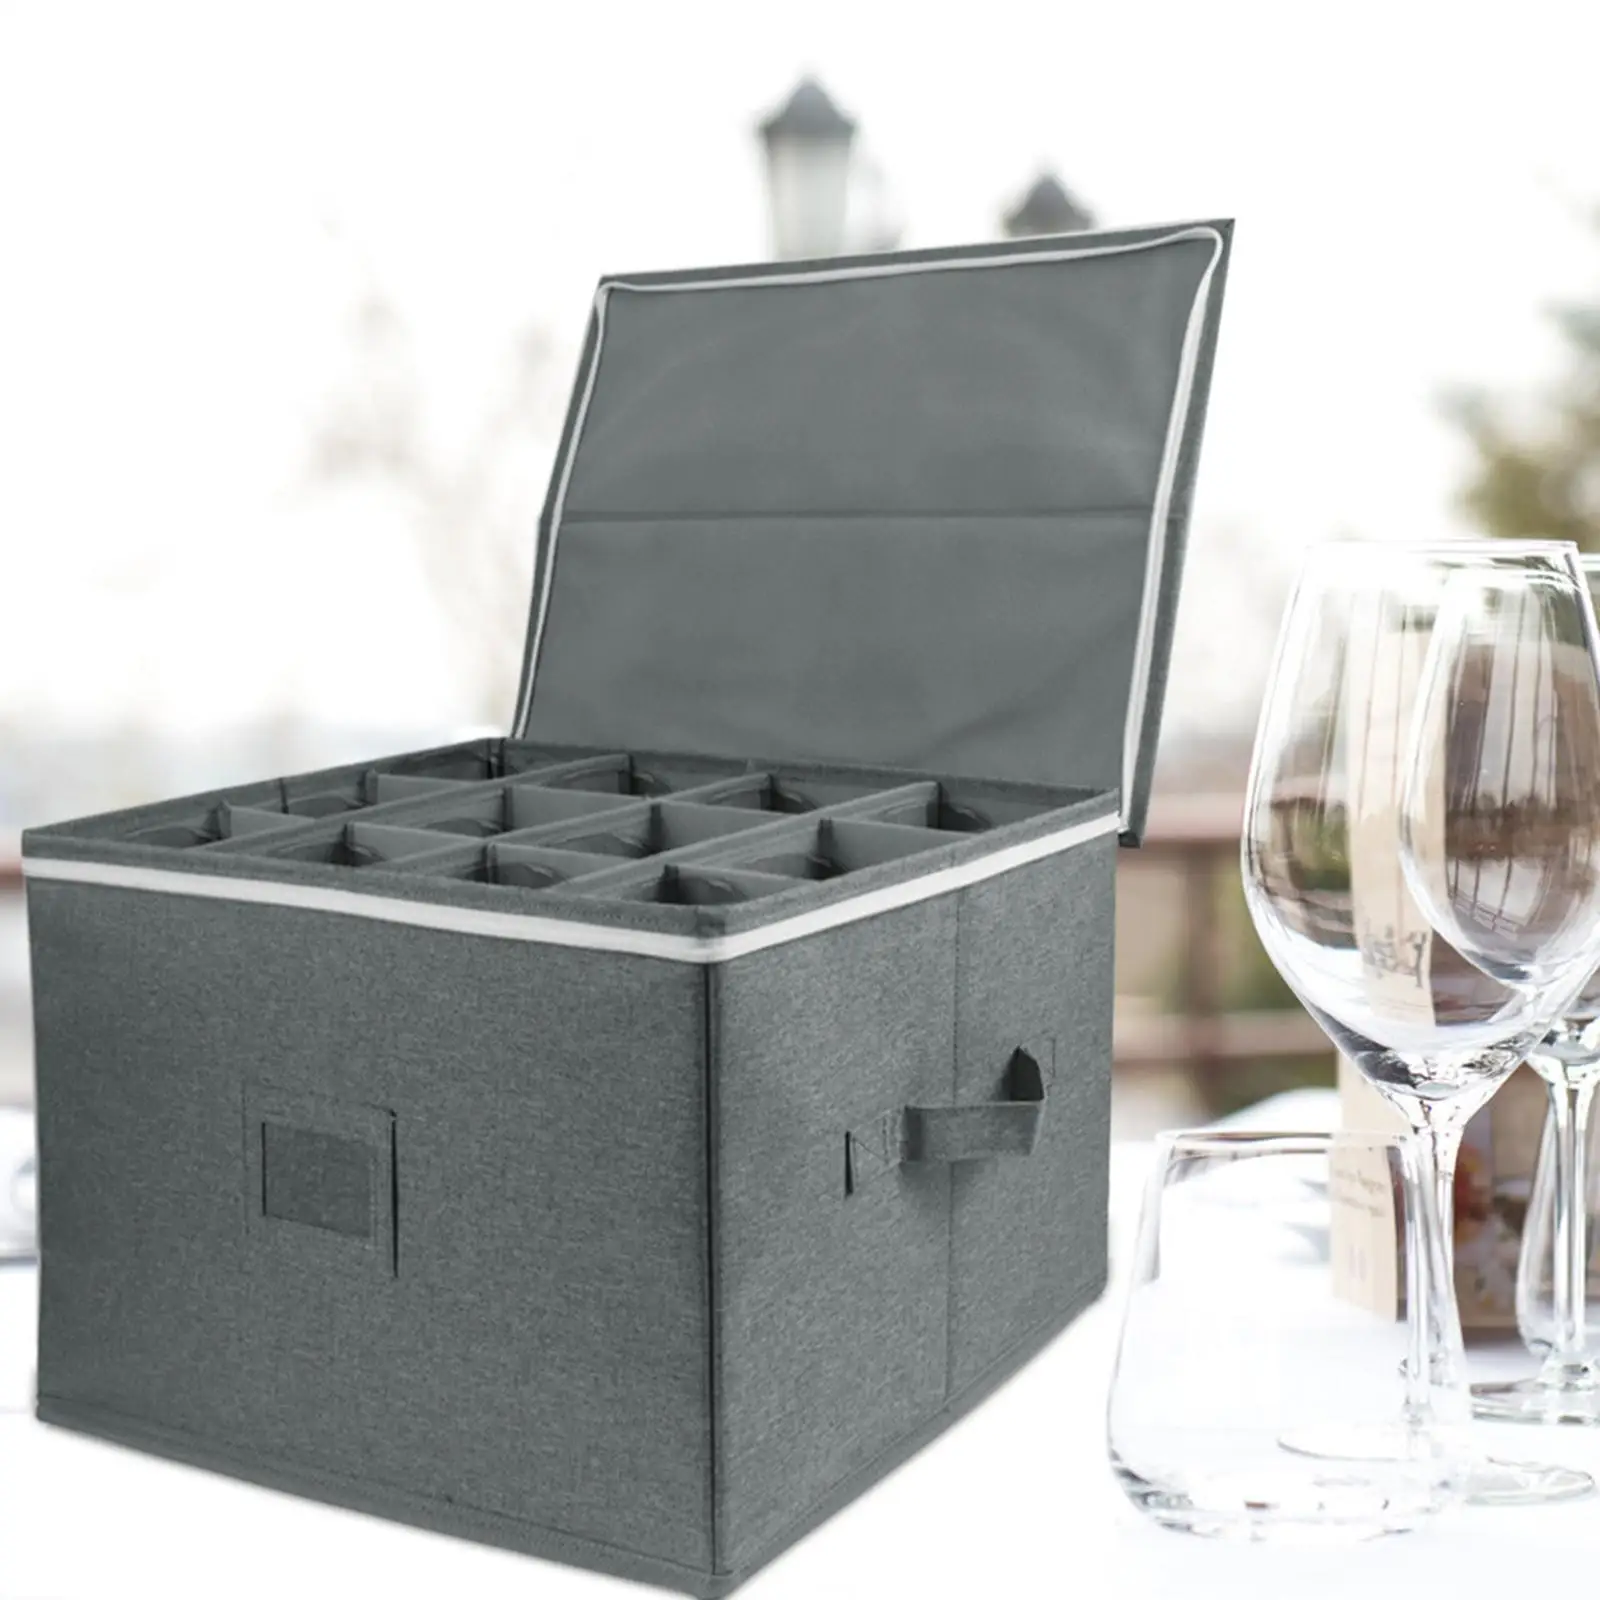 Deluxe Stemware Storage Cases with Dividers Glassware Storage Drinkware Storage Chest for Holds 12 Champagne Flutes Wine Glasses